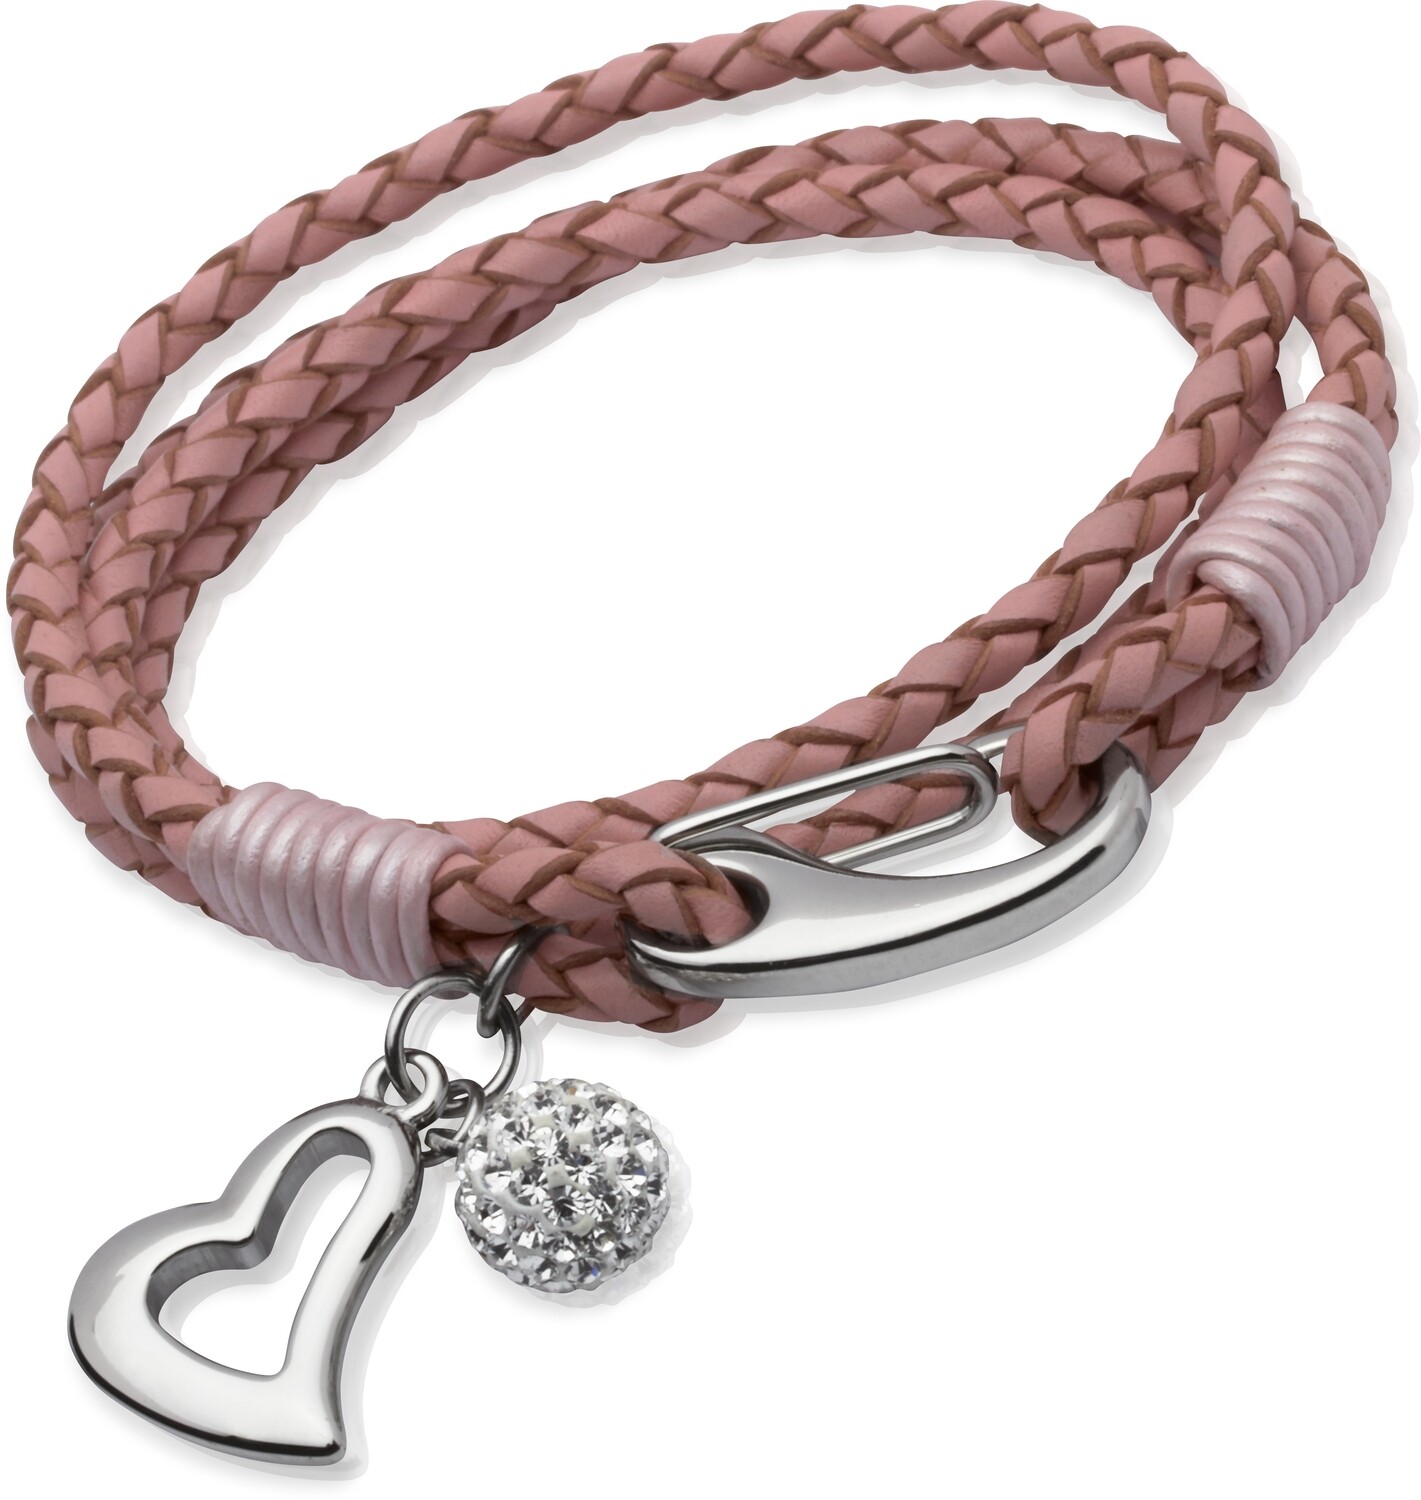 Unique & Co Pink Leather Wrap Bracelet With A Heart And Crystal